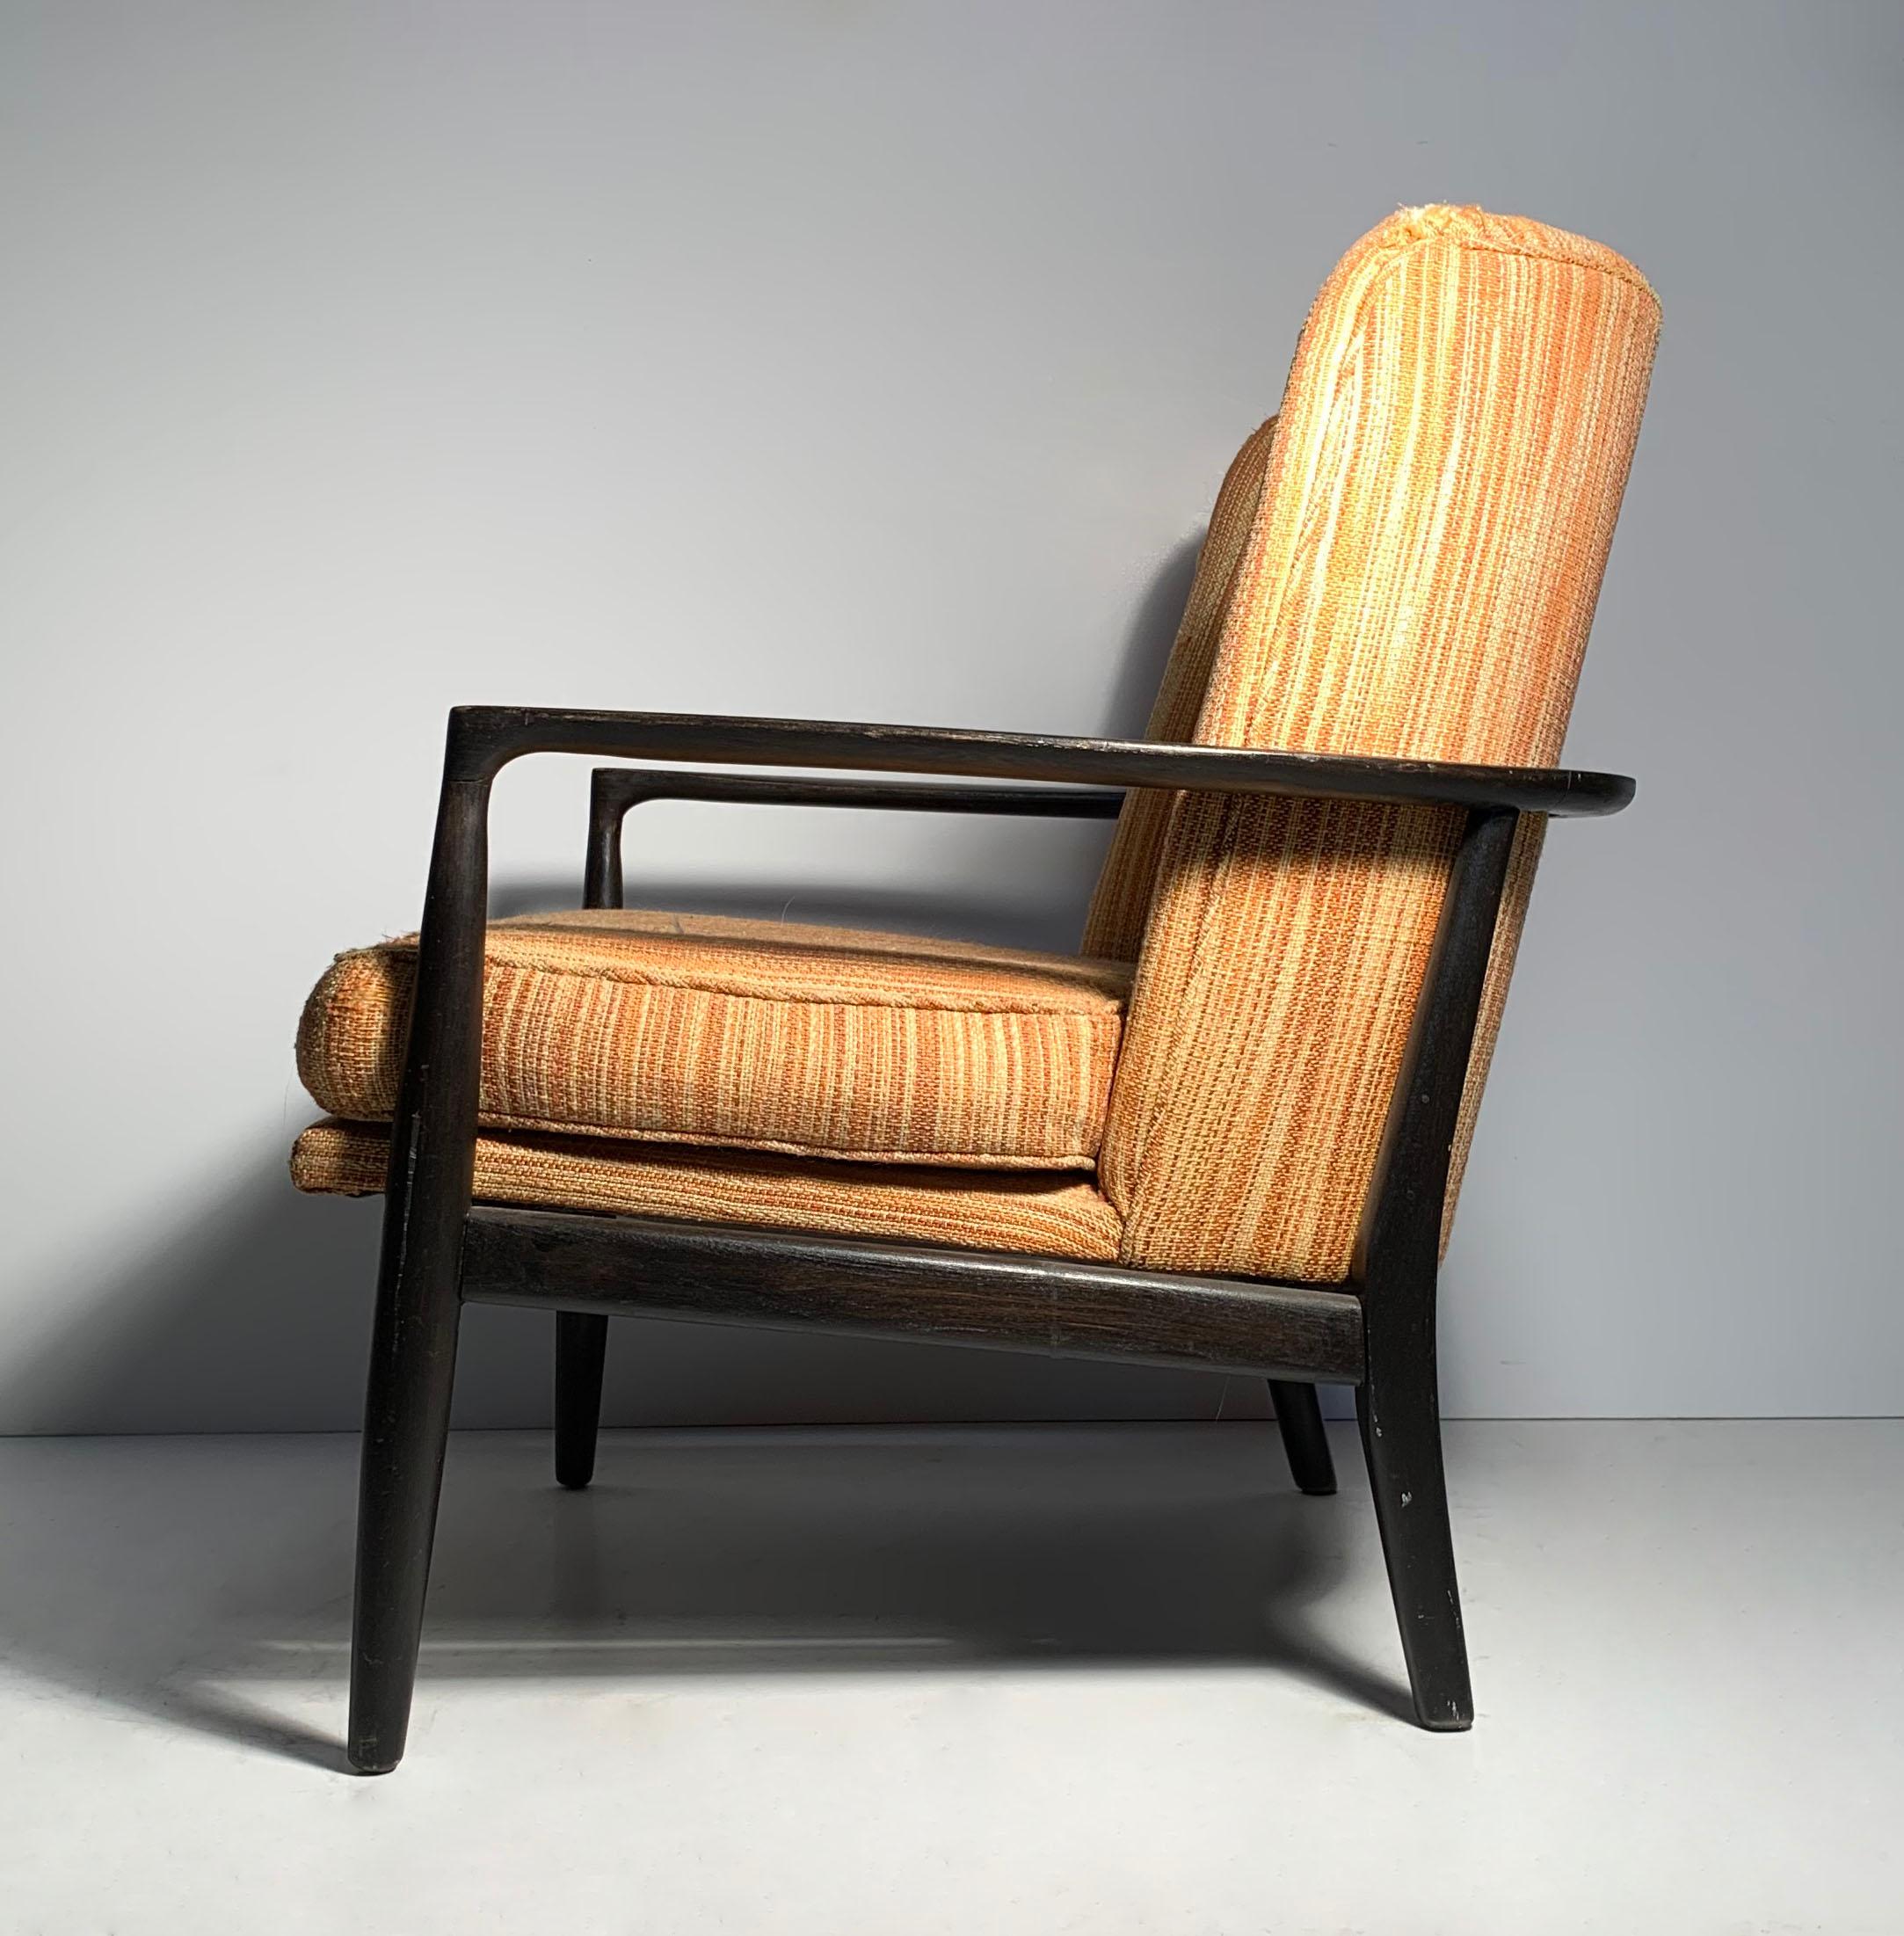 Lawrence Peabody lounge chair model 982 for Nemschoff.

Manner of Milo Baughman and Adrian Pearsall